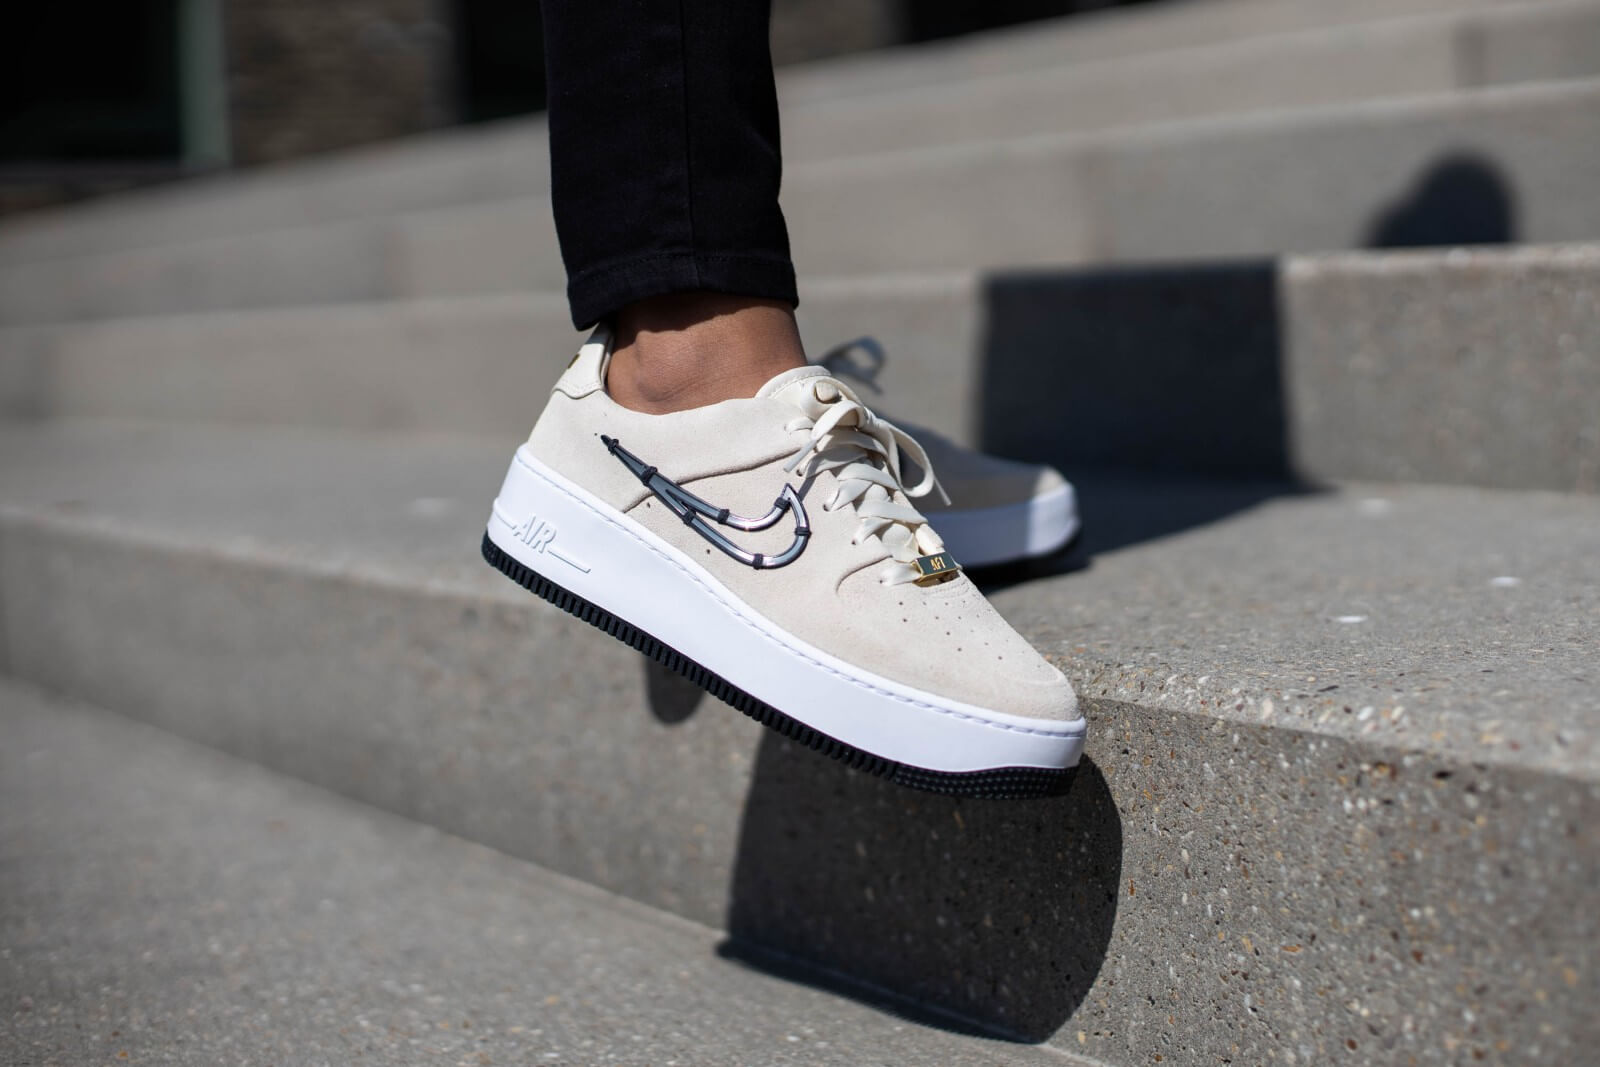 Shesha Lifestyle on Twitter: "WMNS Nike Air Force 1 Low LX SOPHISTICATED STREET STYLE. Taking both height and craft to new levels, the Nike Air Force 1 Sage Low LX features